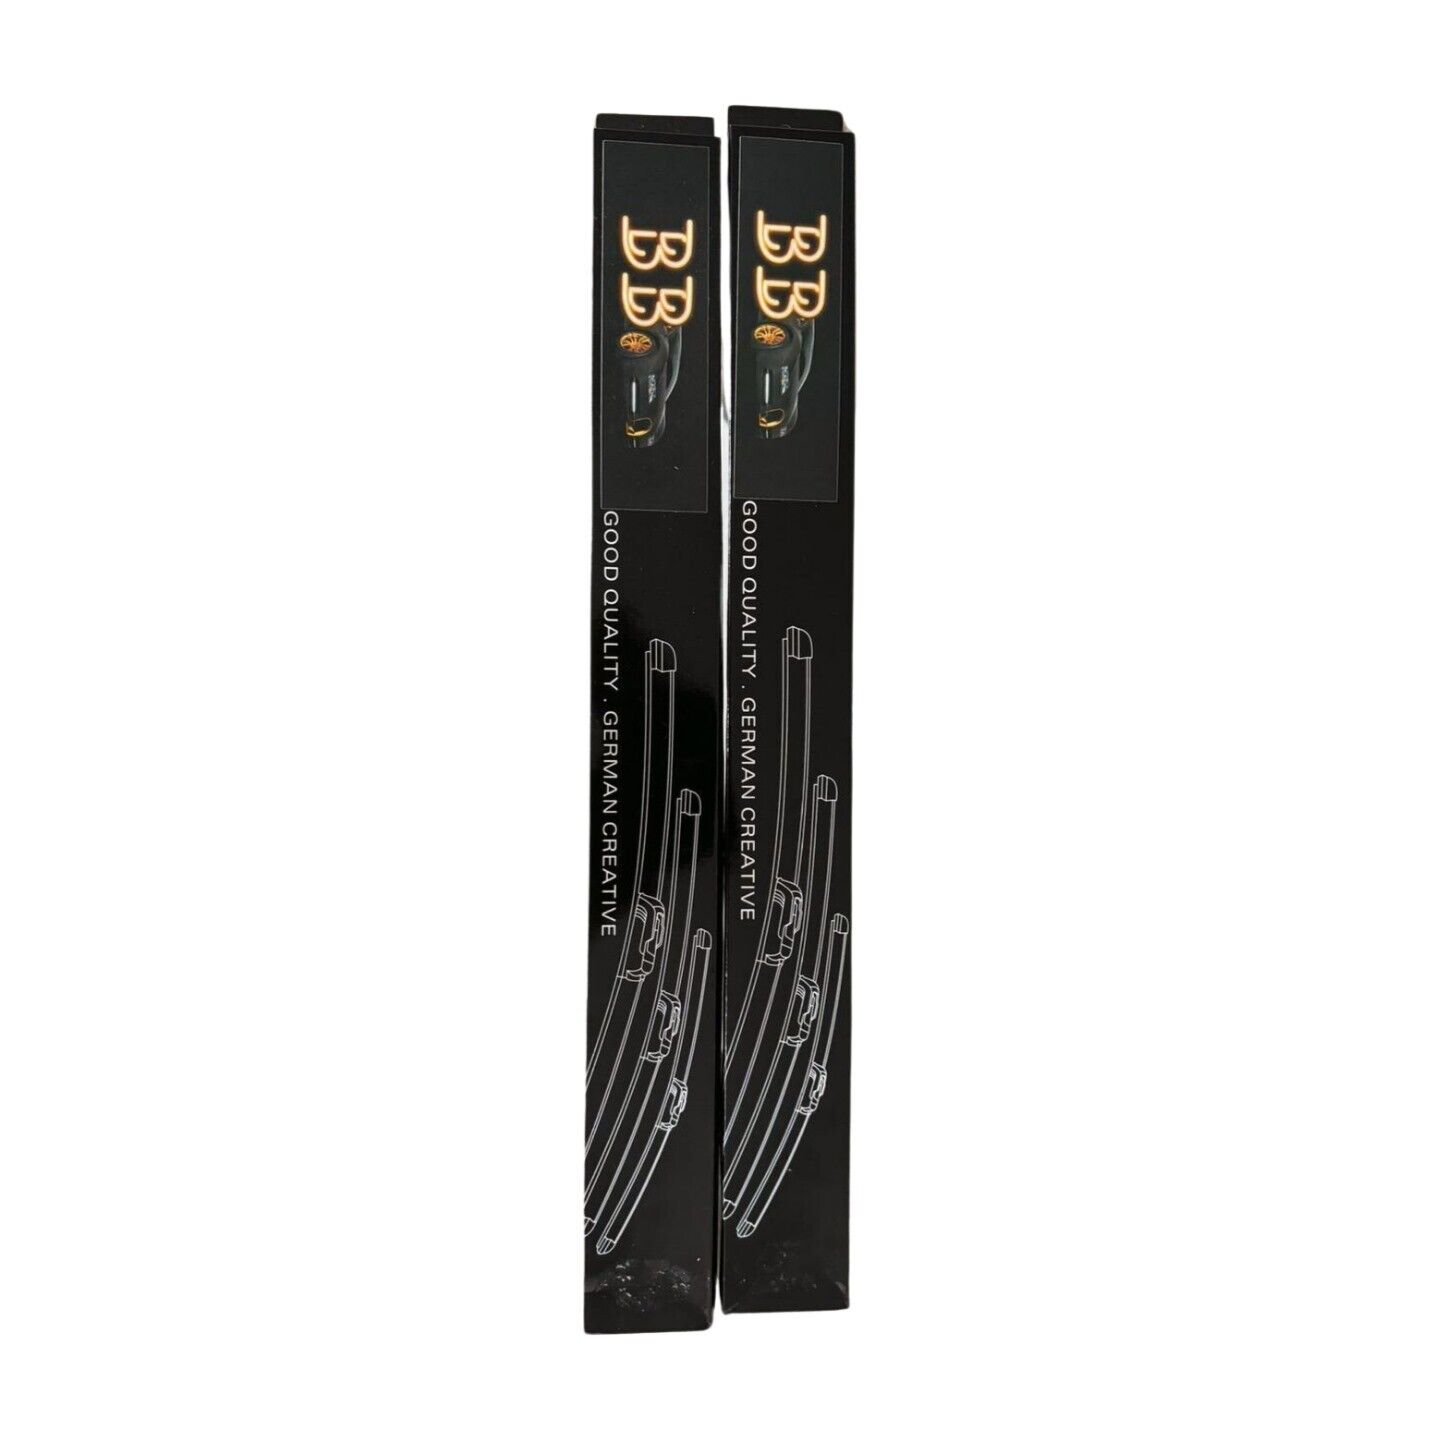 WIPER BLADES FOR JEEP GRAND CHEROKEE 2005-2010 (WH)